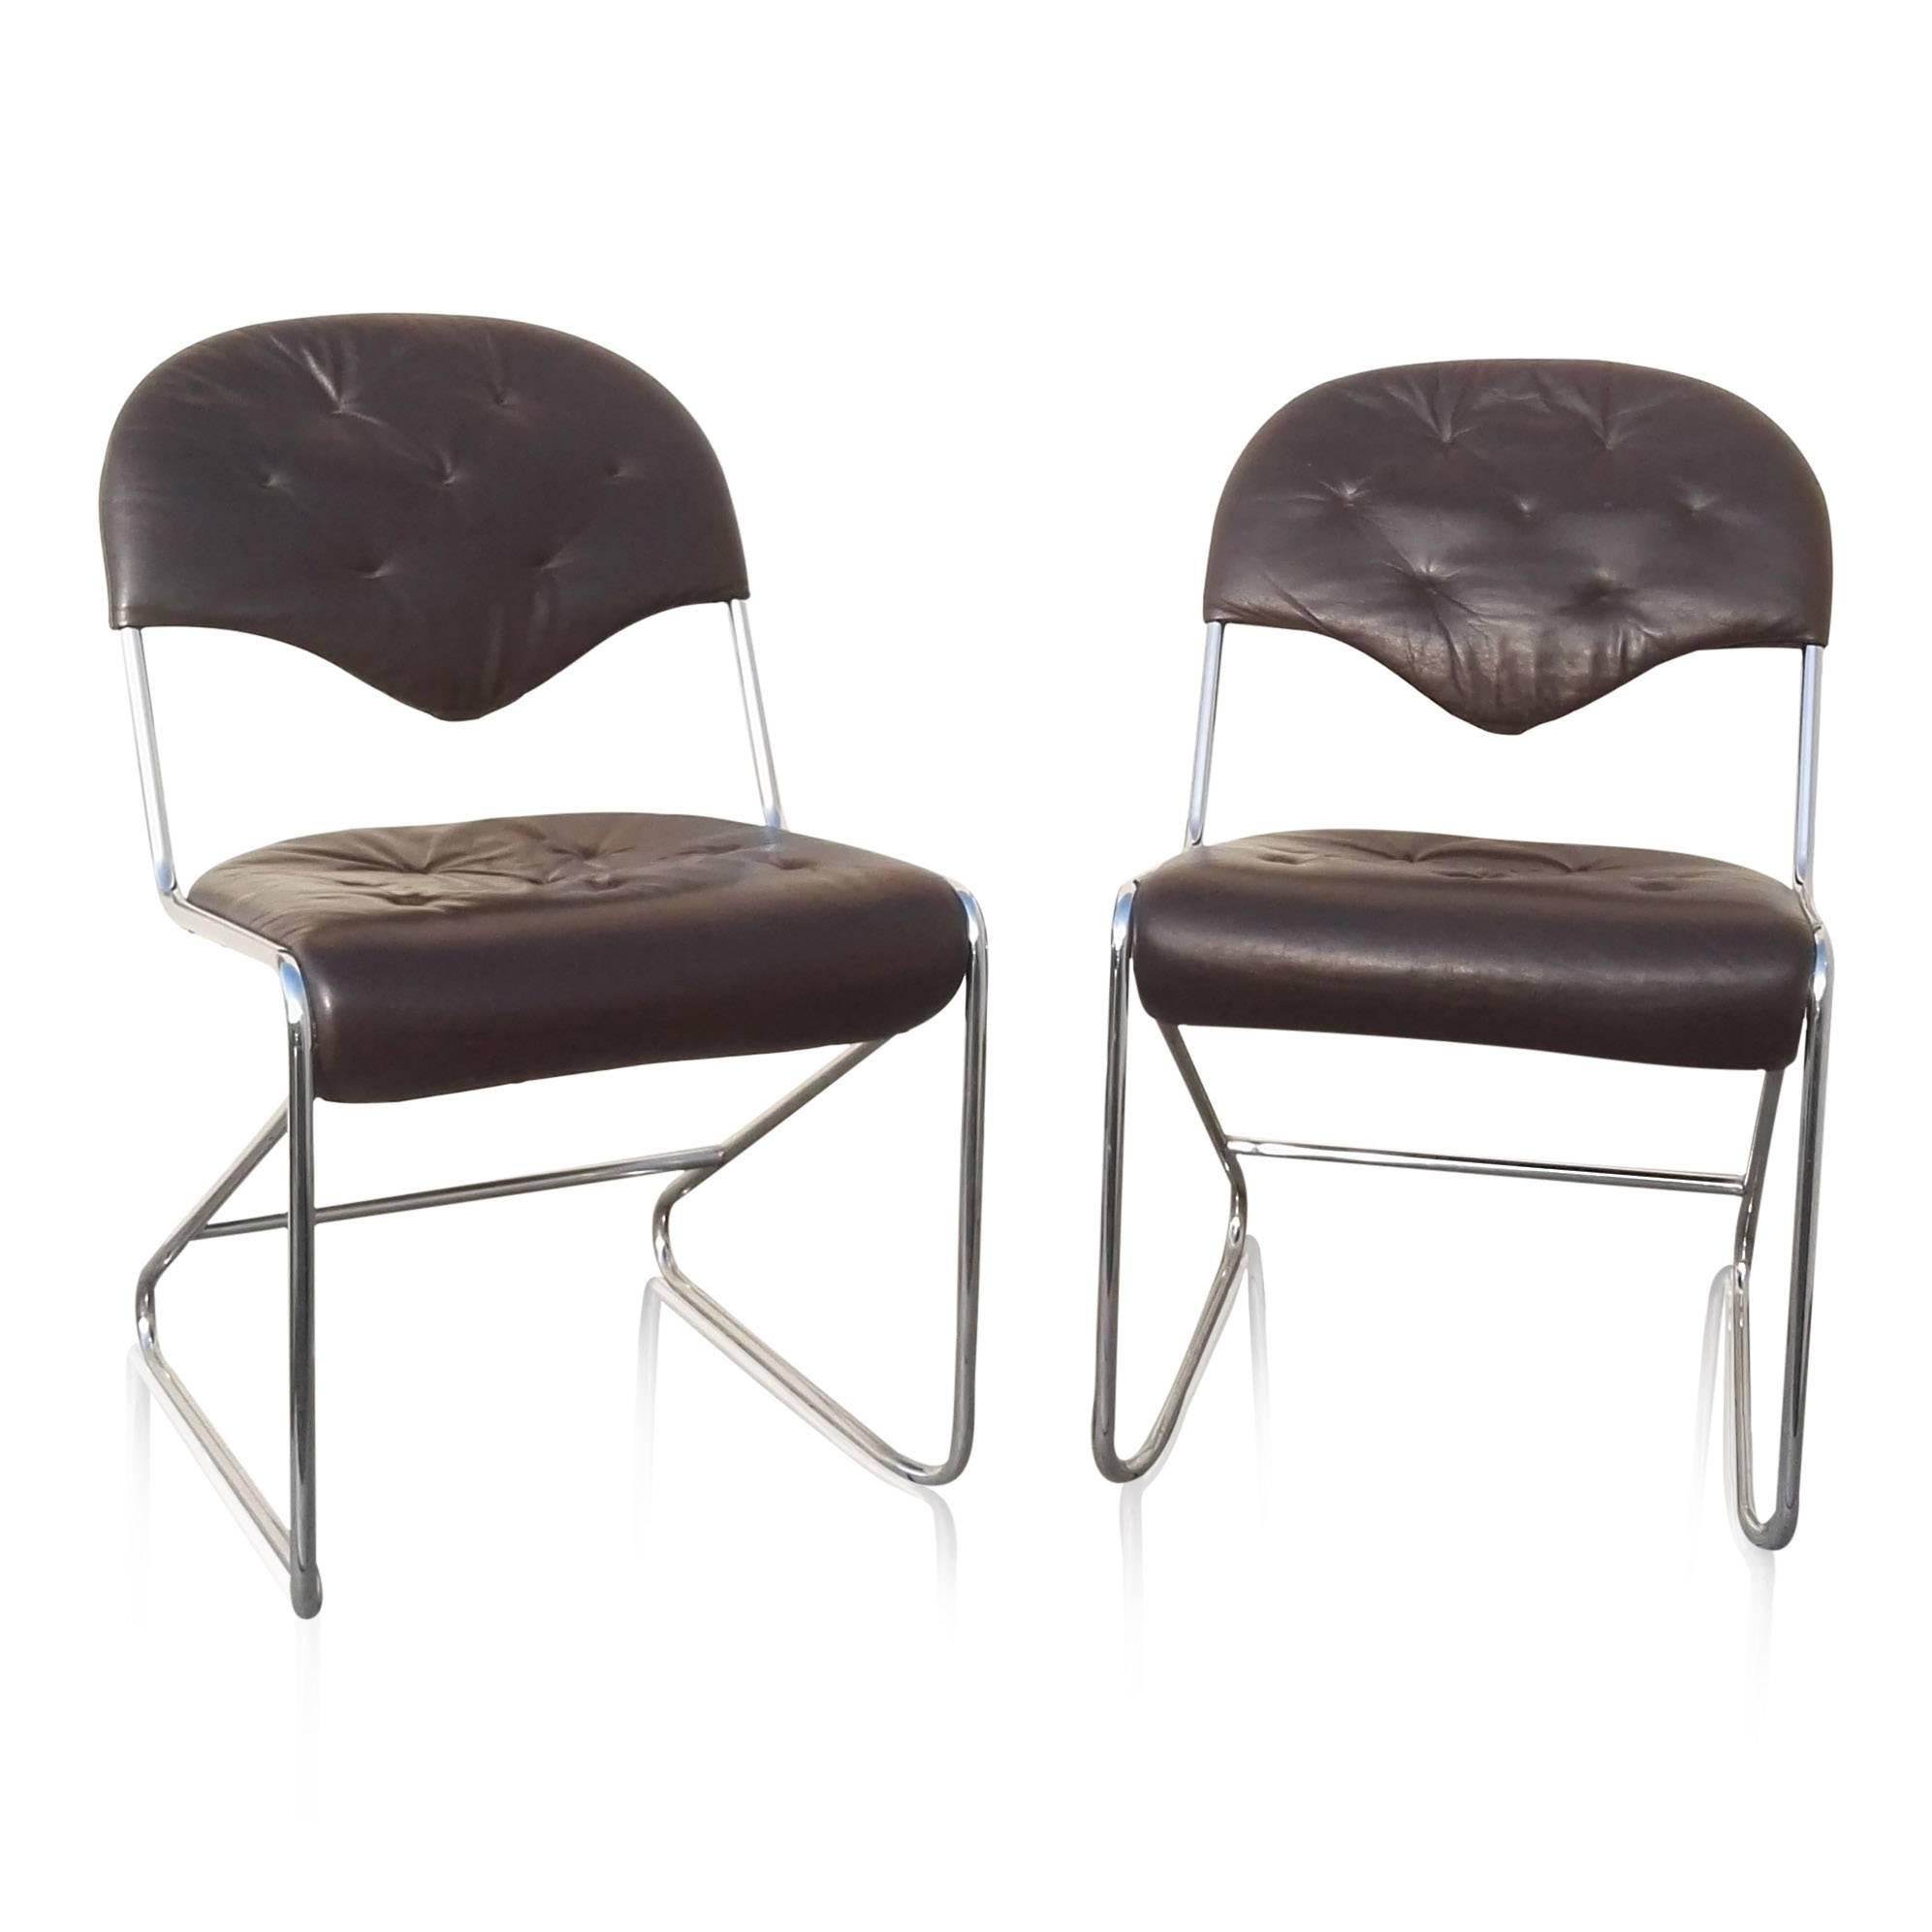 Pair of Chrome and Leather Chairs in the Style of Faleschini, Italy, 1970s